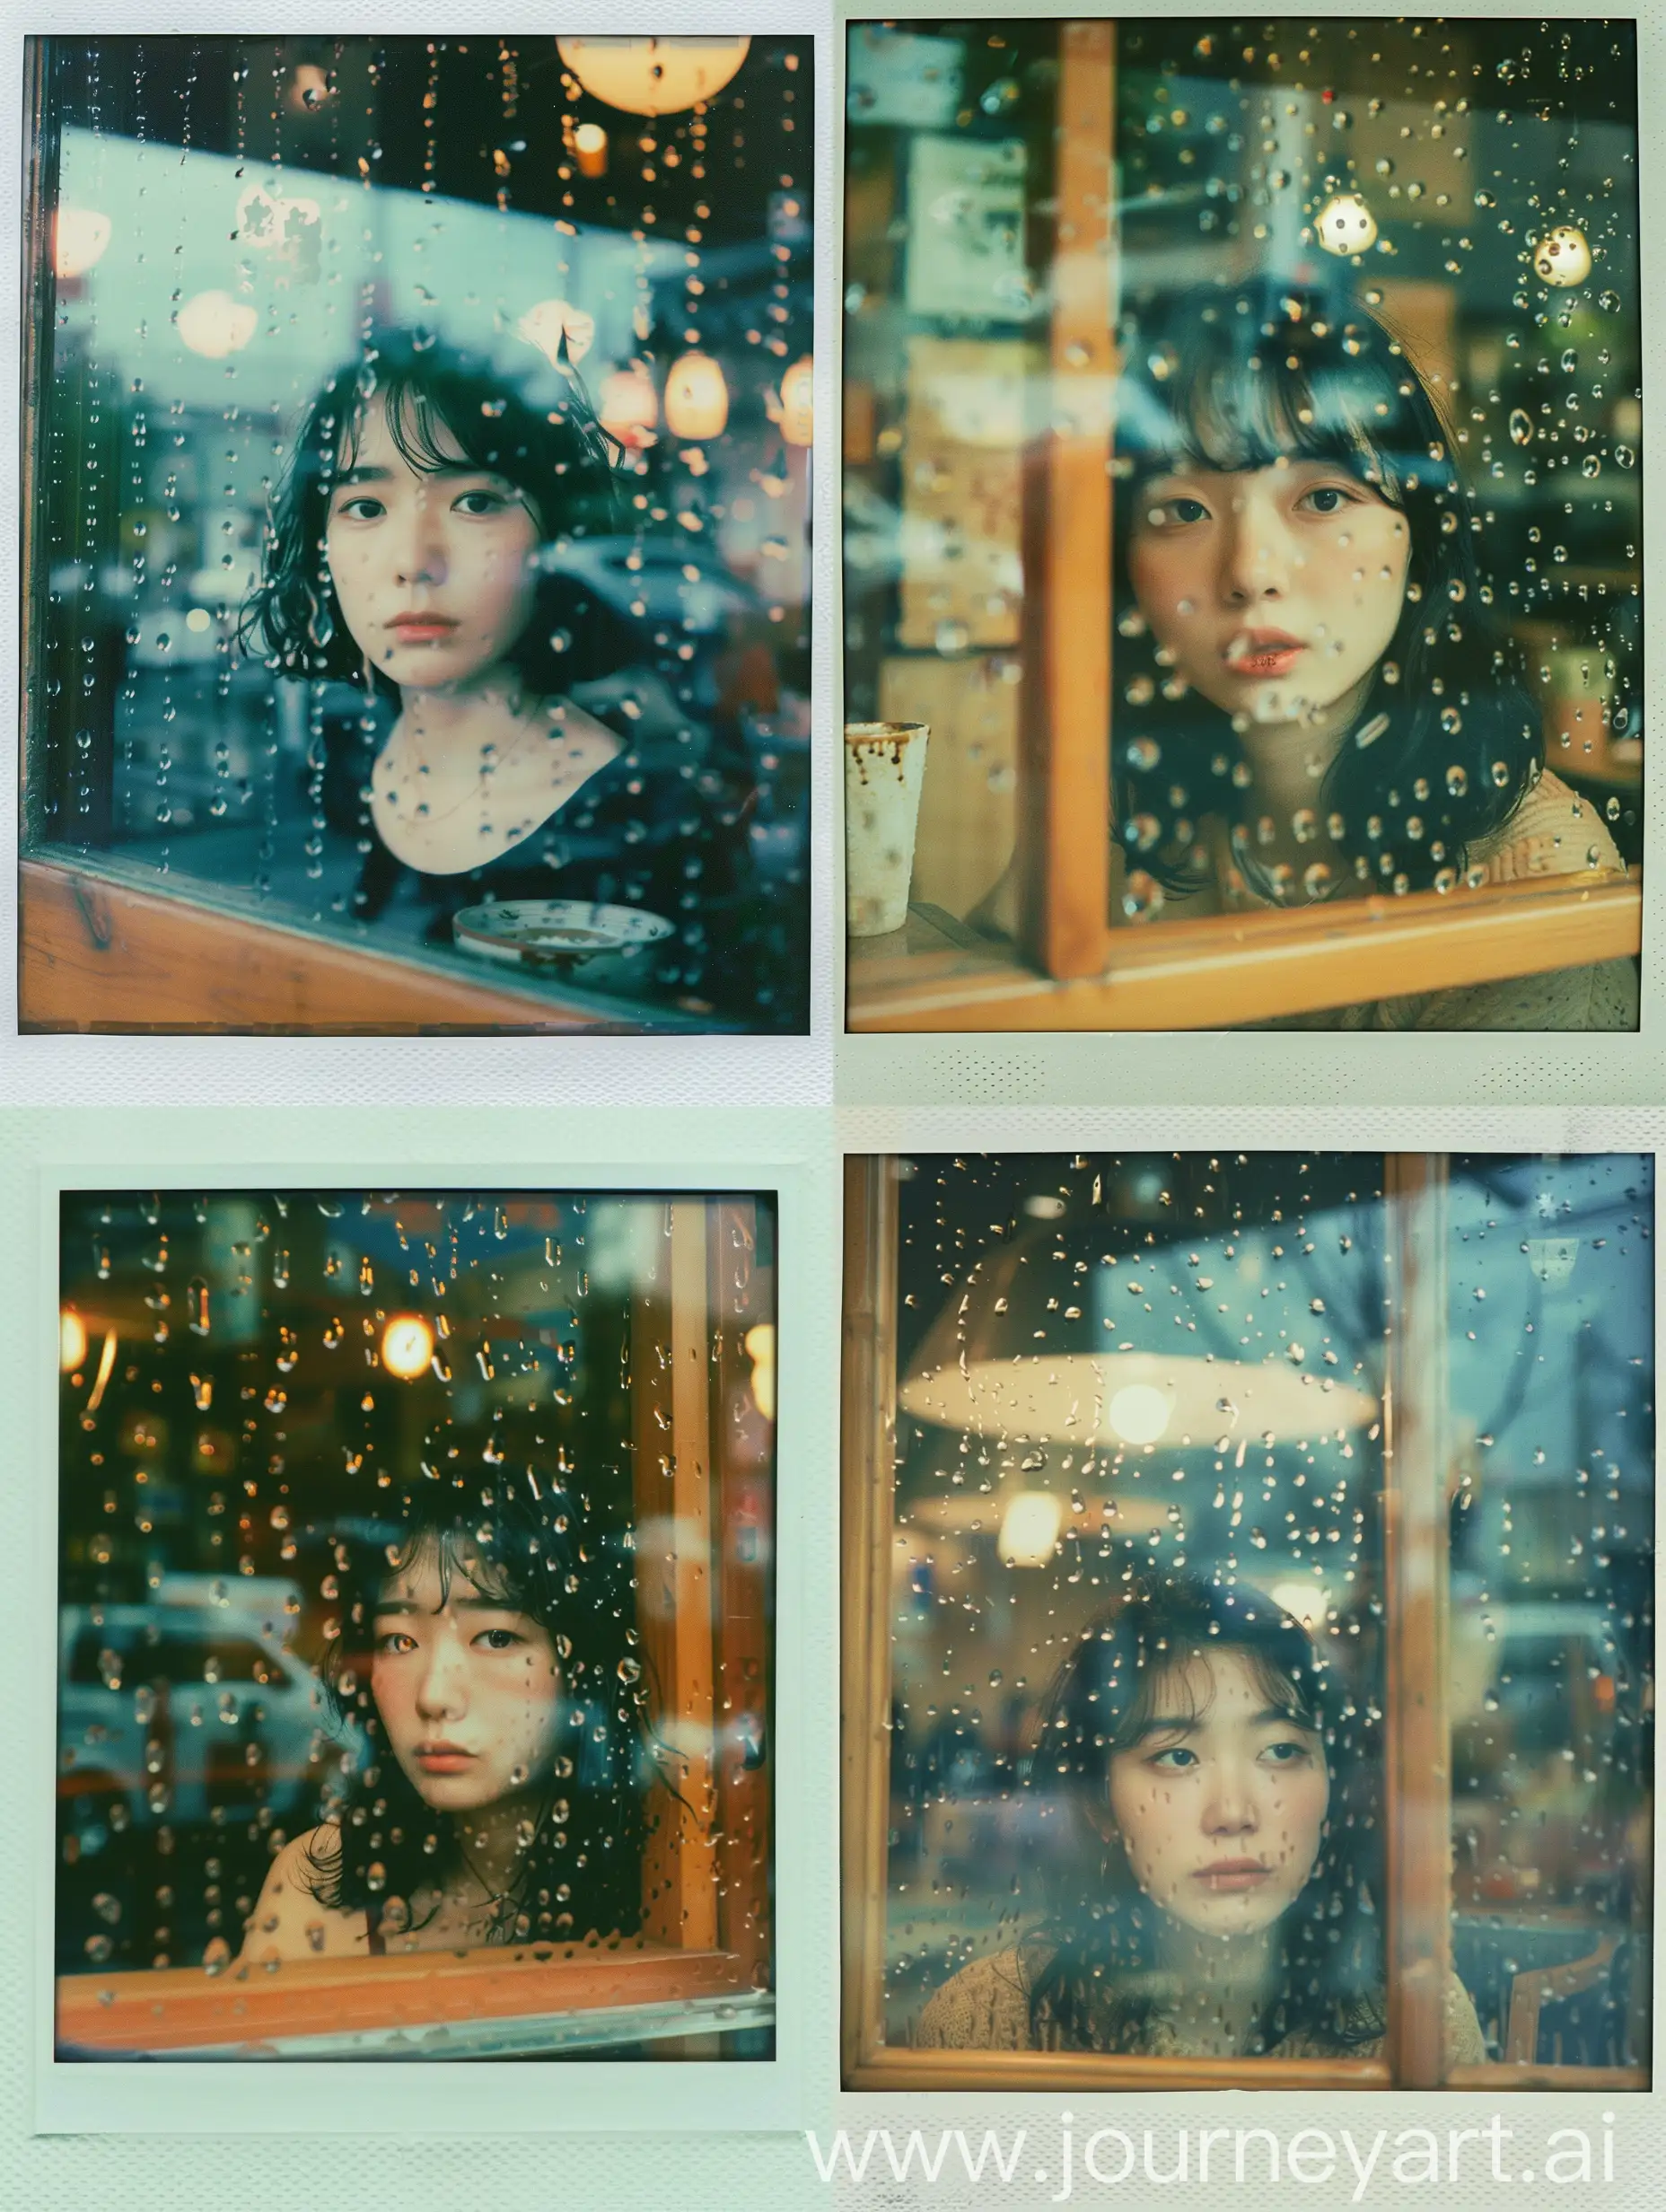 Asian-Woman-Contemplating-Rainy-Day-in-Cafe-Nostalgic-Atmosphere-with-Strong-Reflections-and-Film-Grain